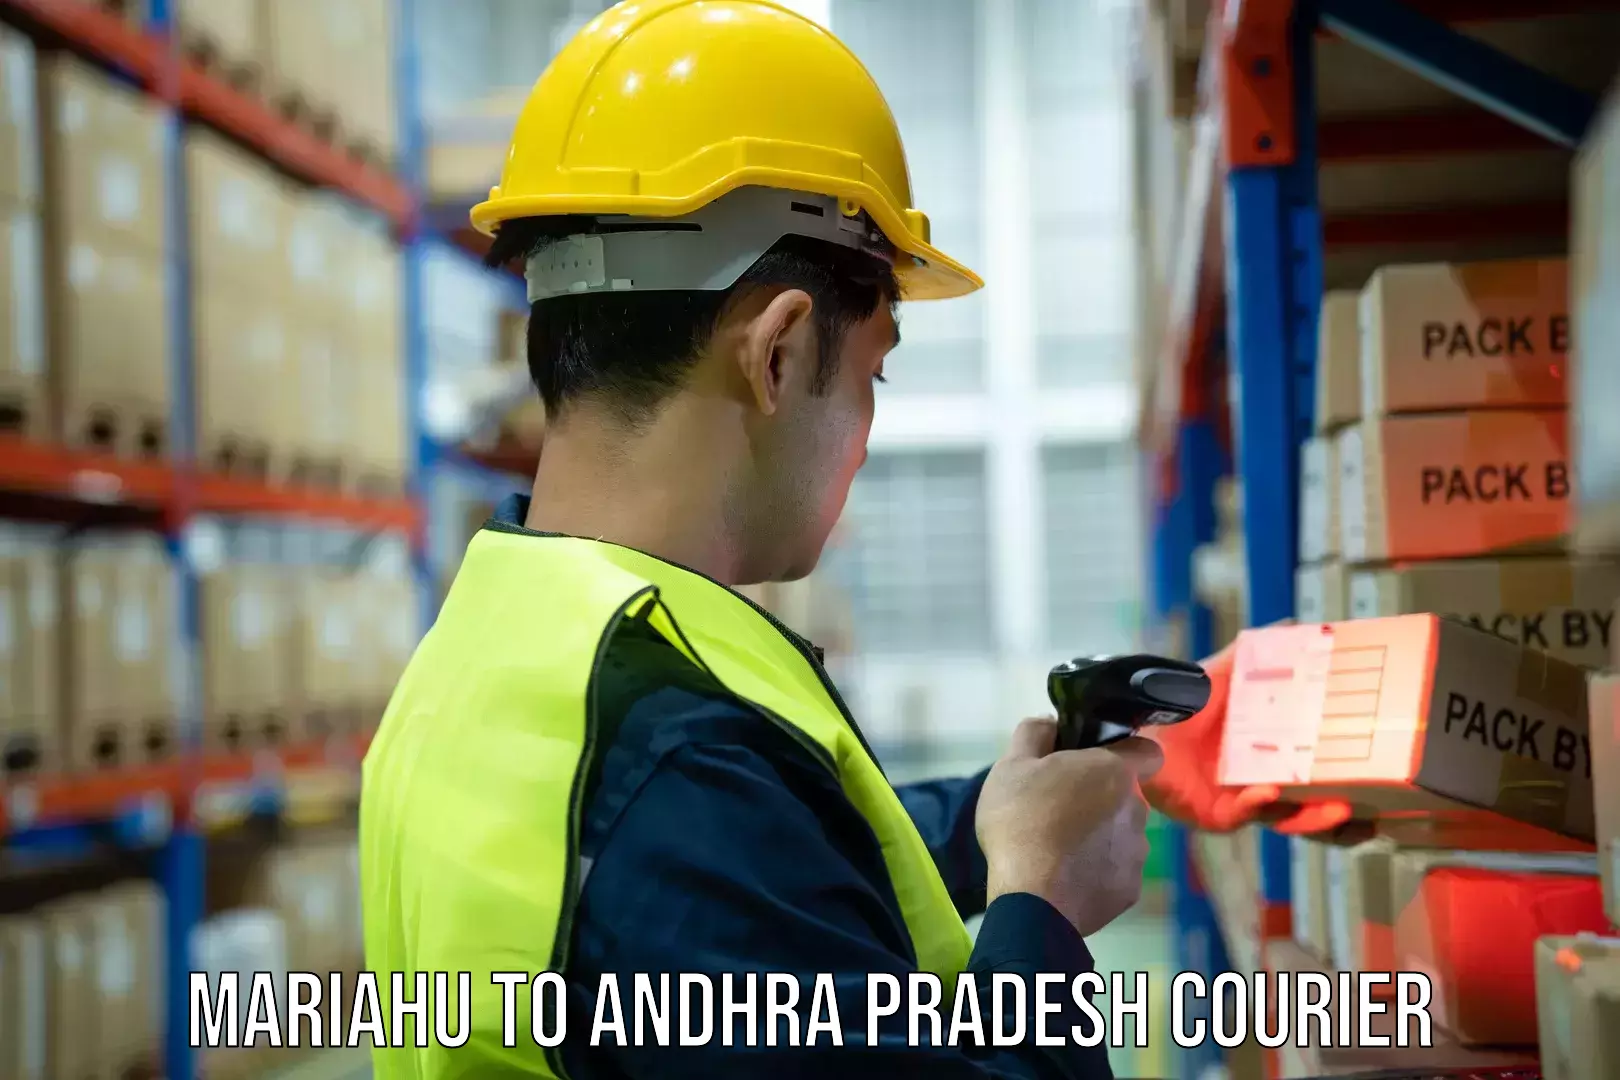 Business delivery service Mariahu to Andhra Pradesh